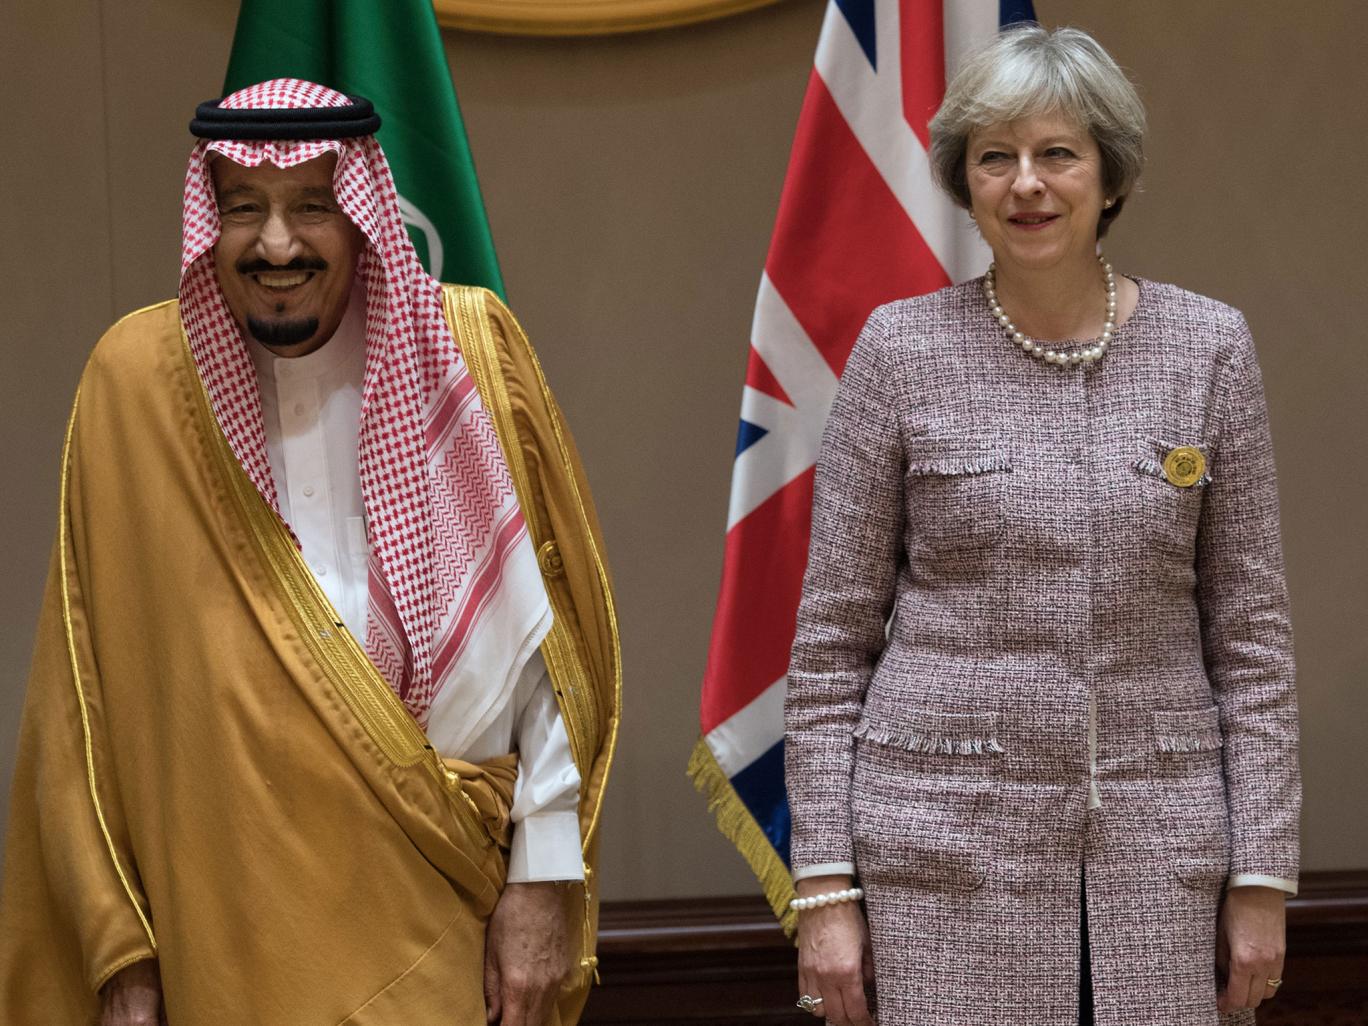 UK accused of 'blatant double standards' over Saudi Arabia relations amid comparisons to Isis brutality